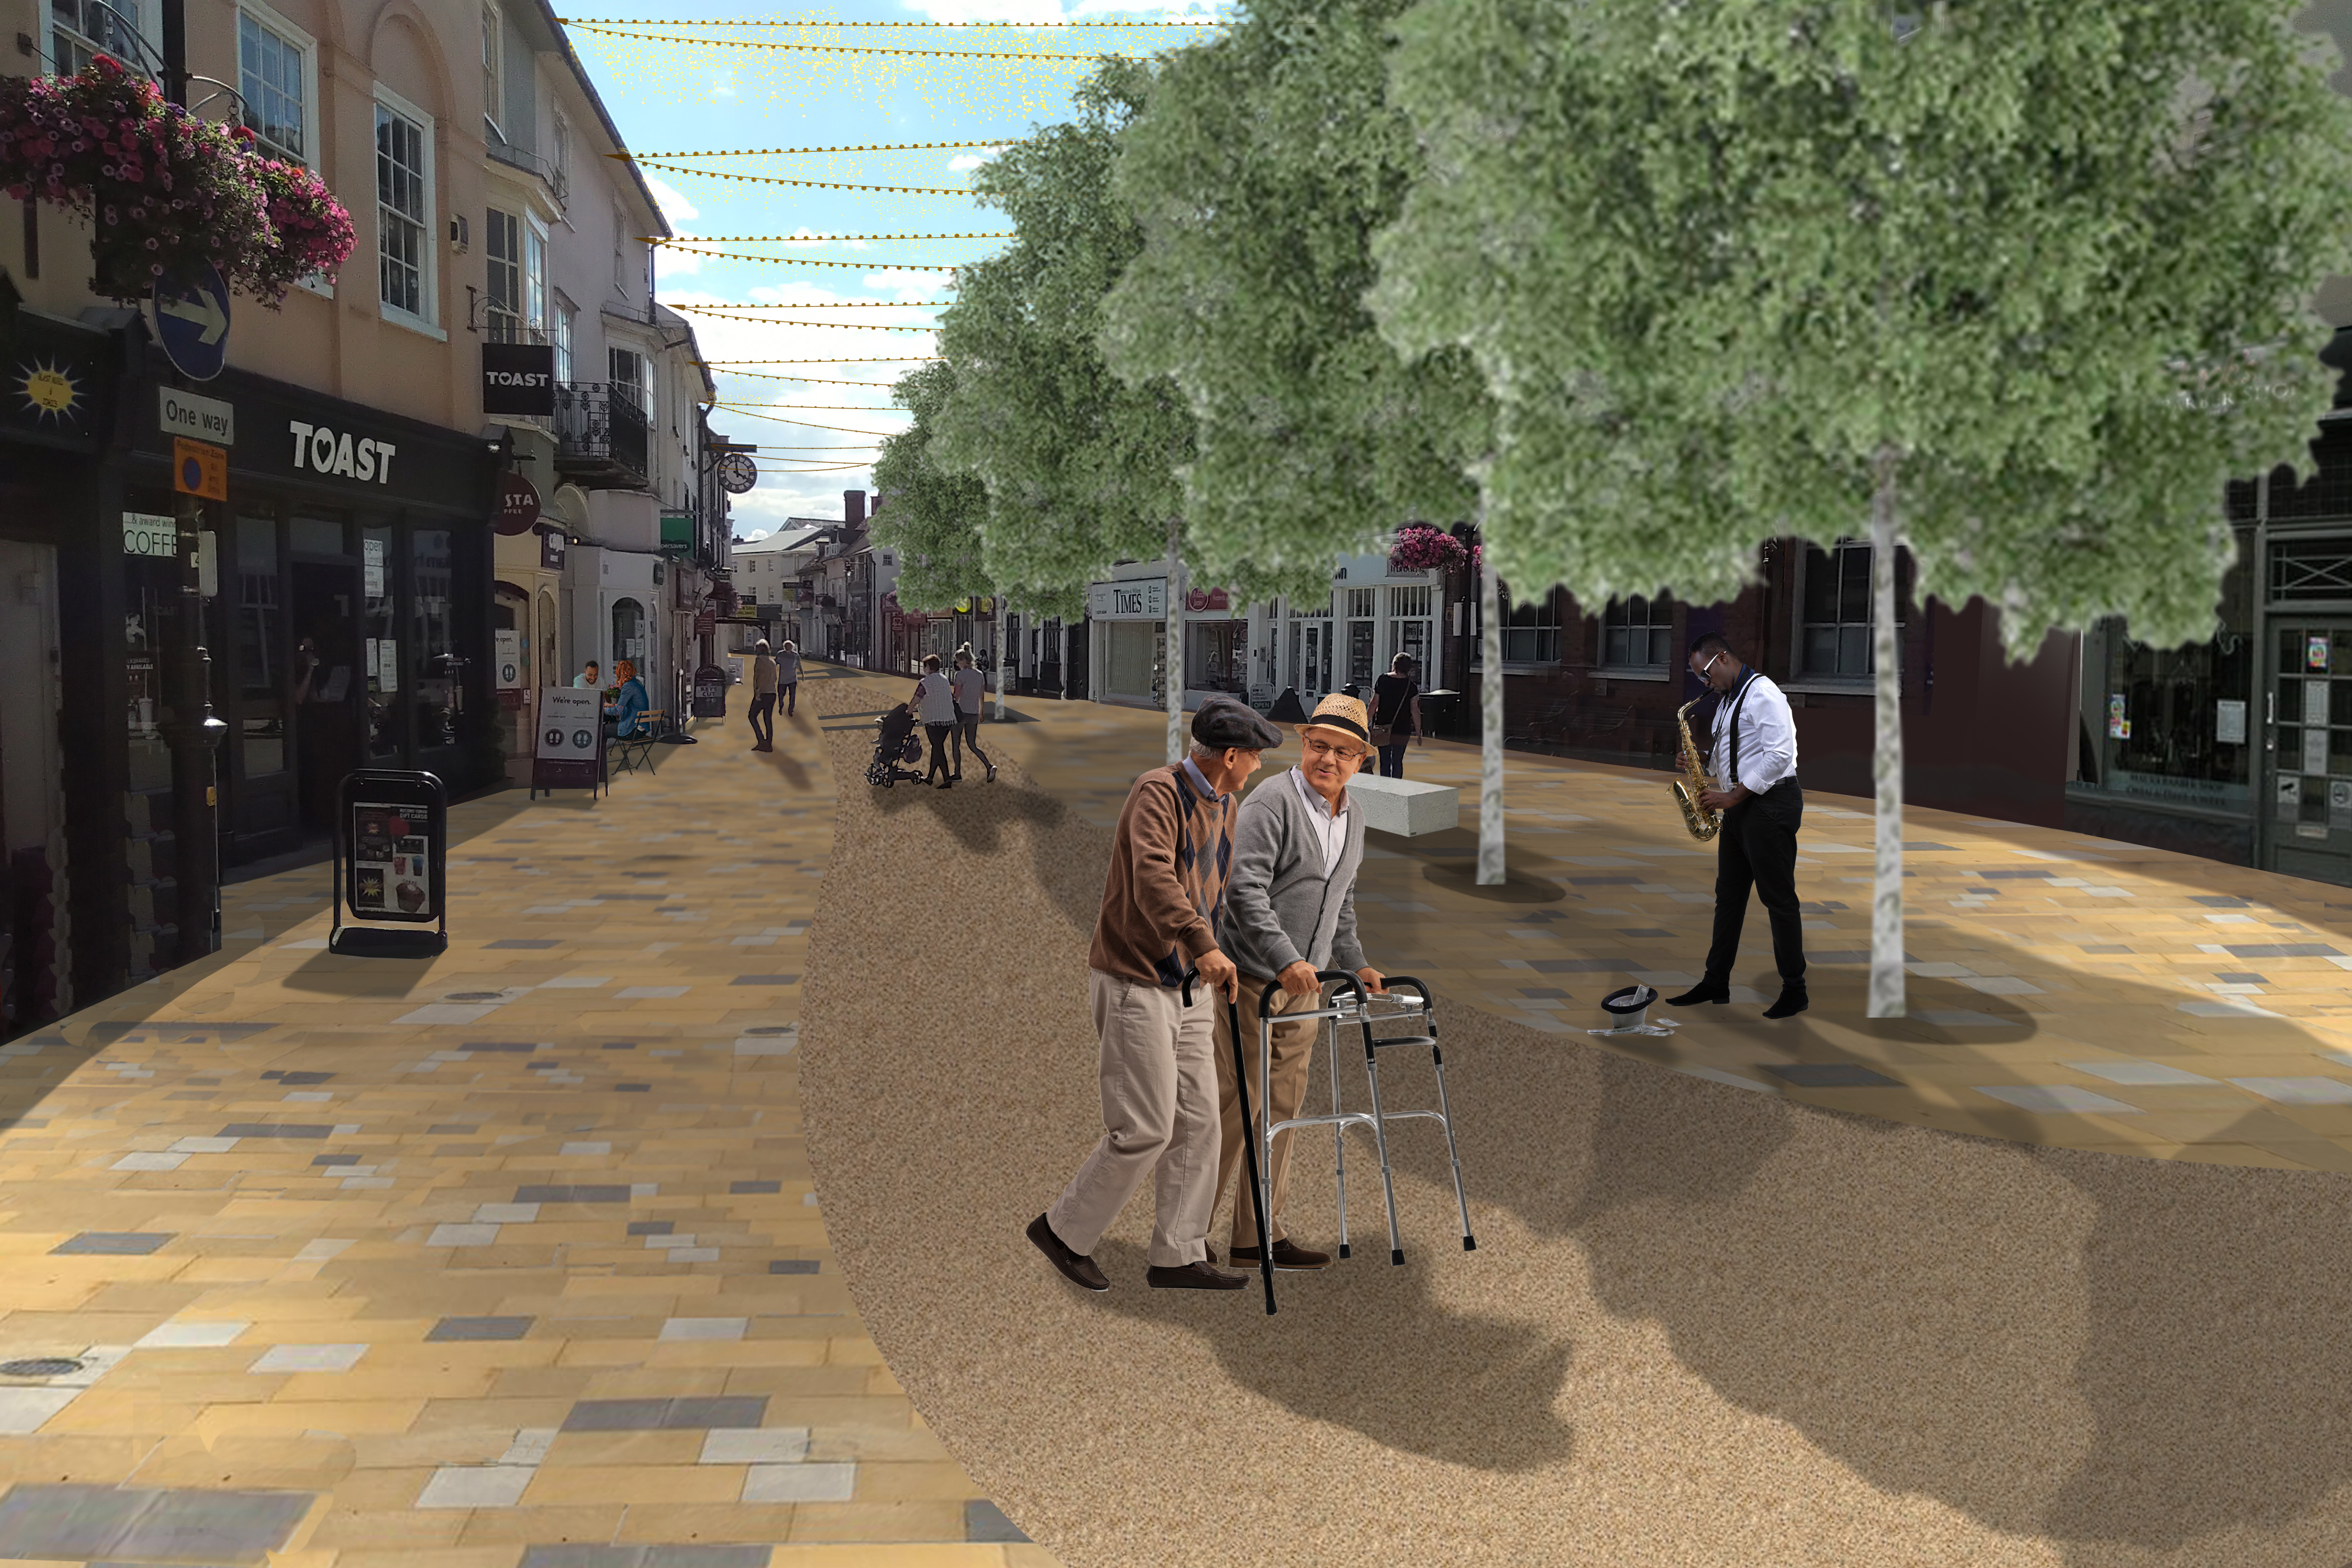 Concept design for how a pedestrianised town centre will look. It shows a fully paved high street with people walking along it.